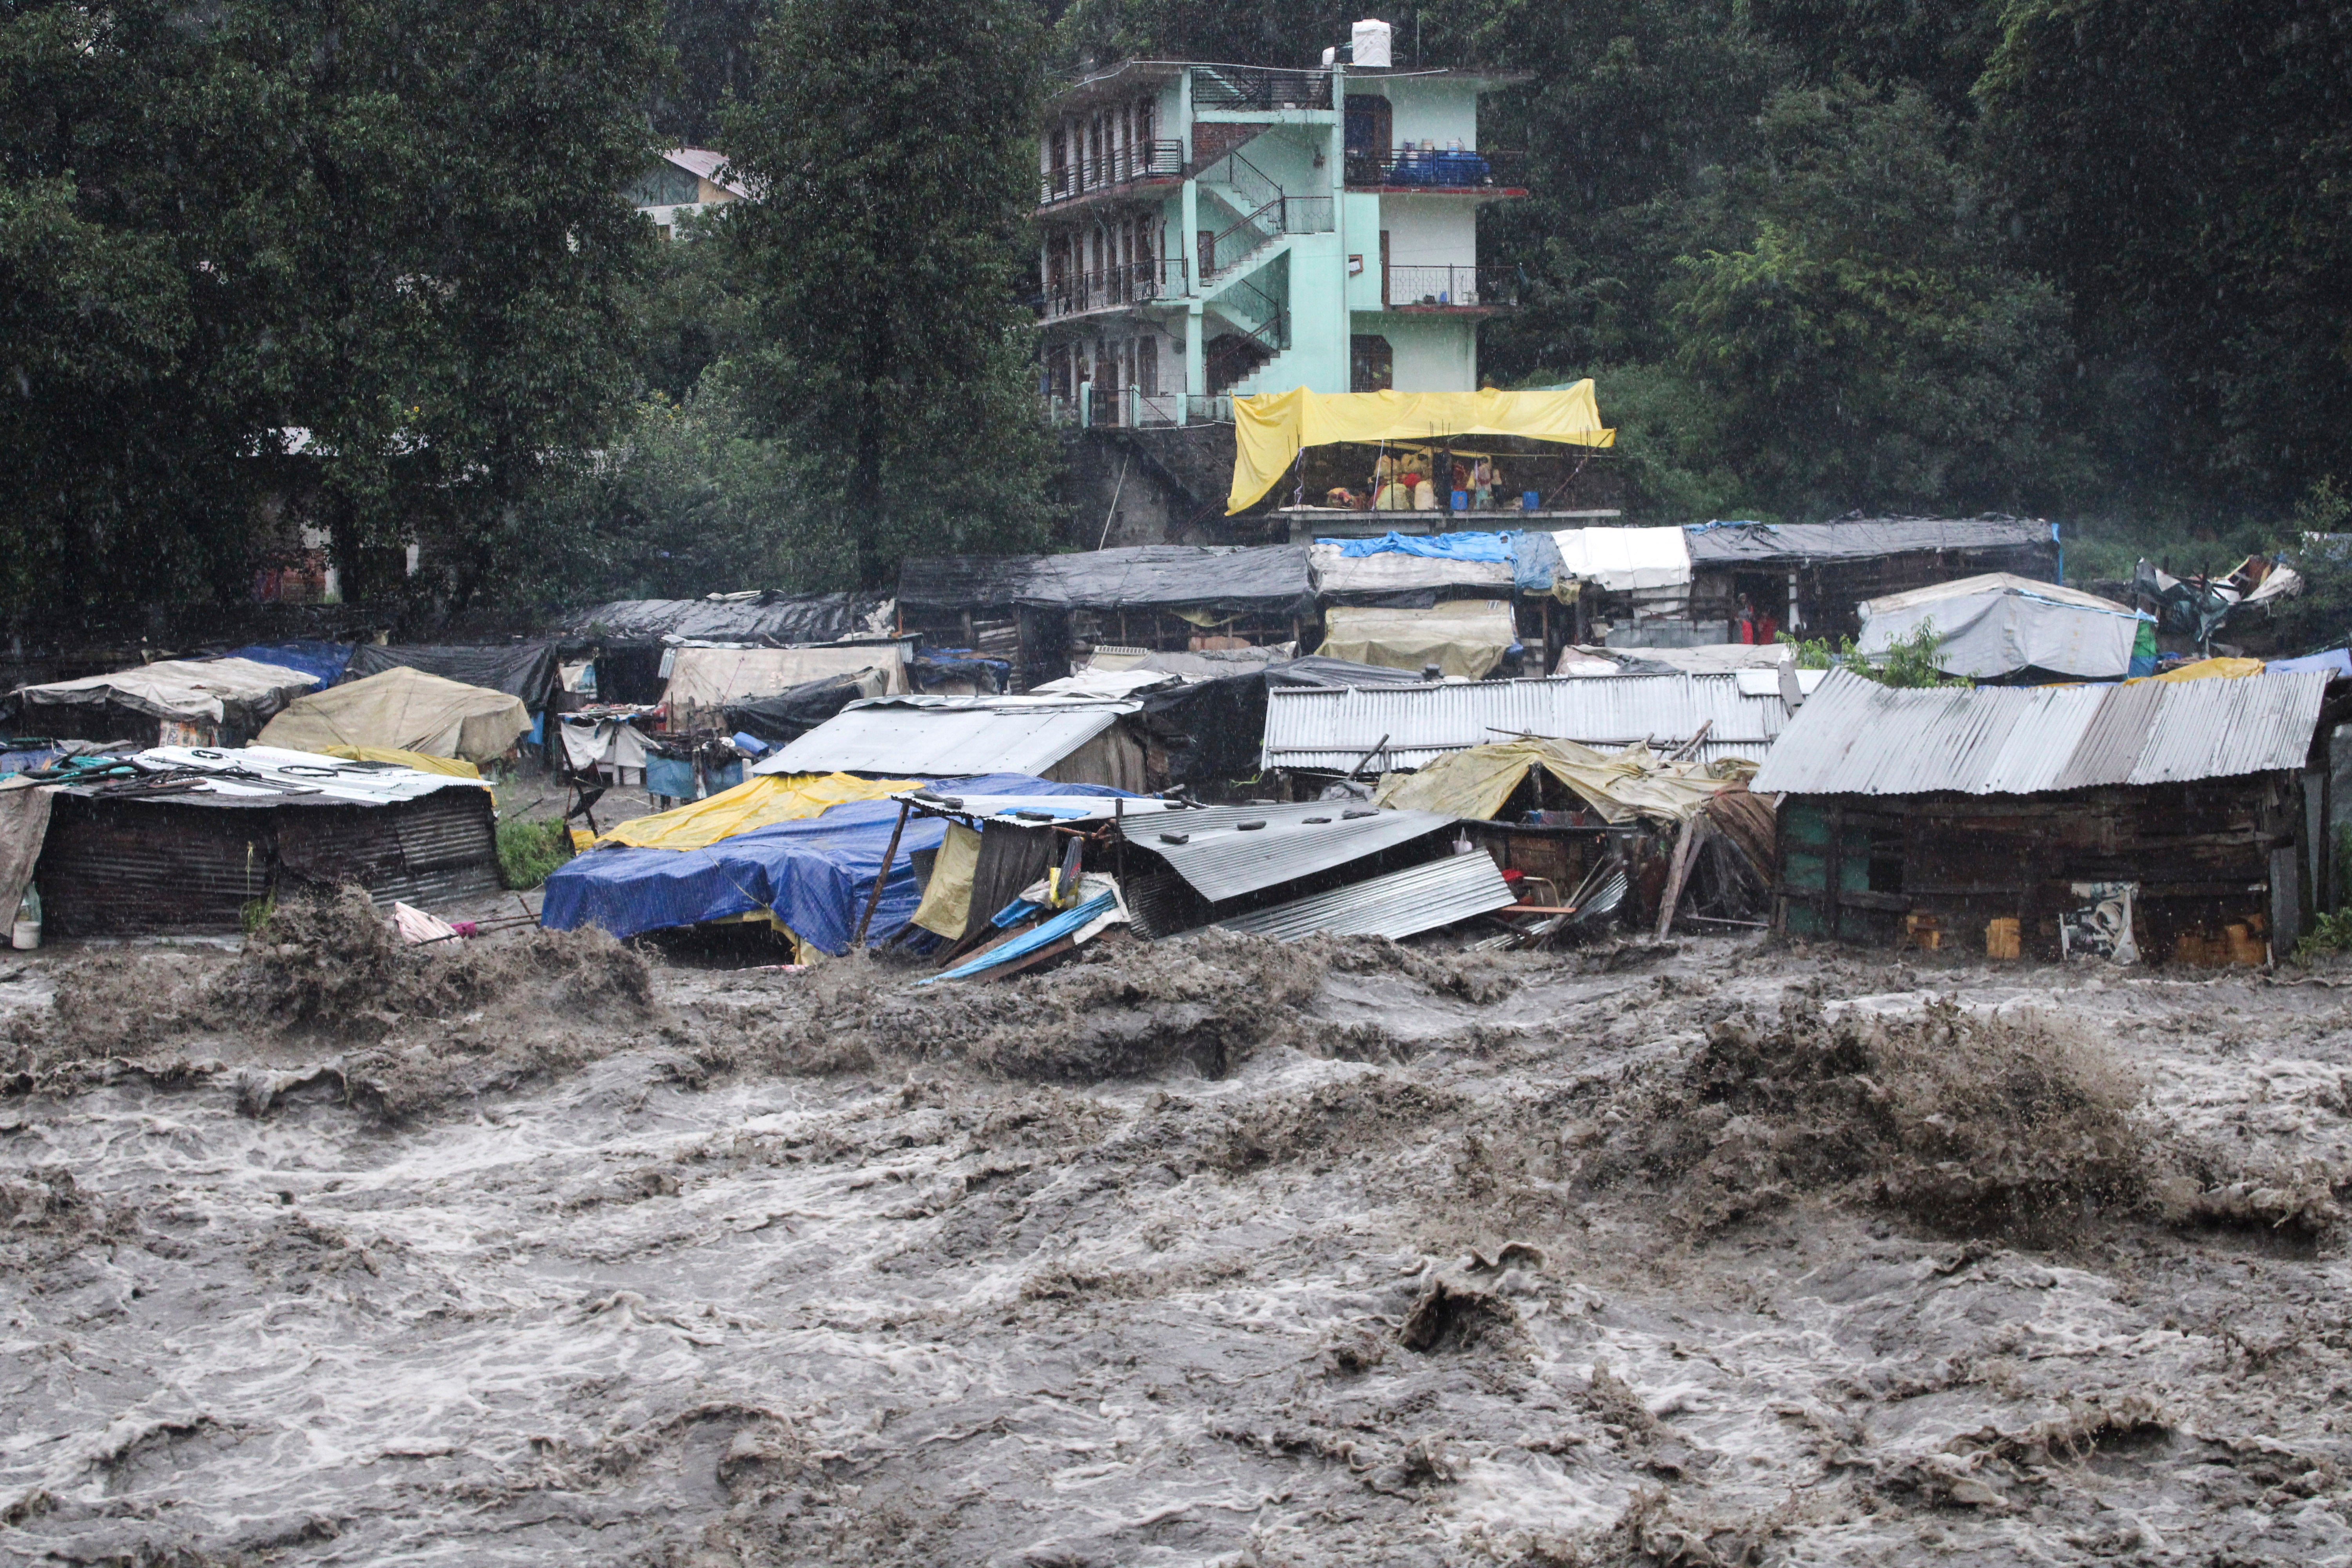 A swollen River Beas following heavy rains in Kullu, Himachal Pradesh, India, on July 9, 2023. Heavy rain fall has triggered landslides, damaged houses and caused loss of lives. Poorer countries facing worsening climate disasters are calling for greater financial support from rich nations